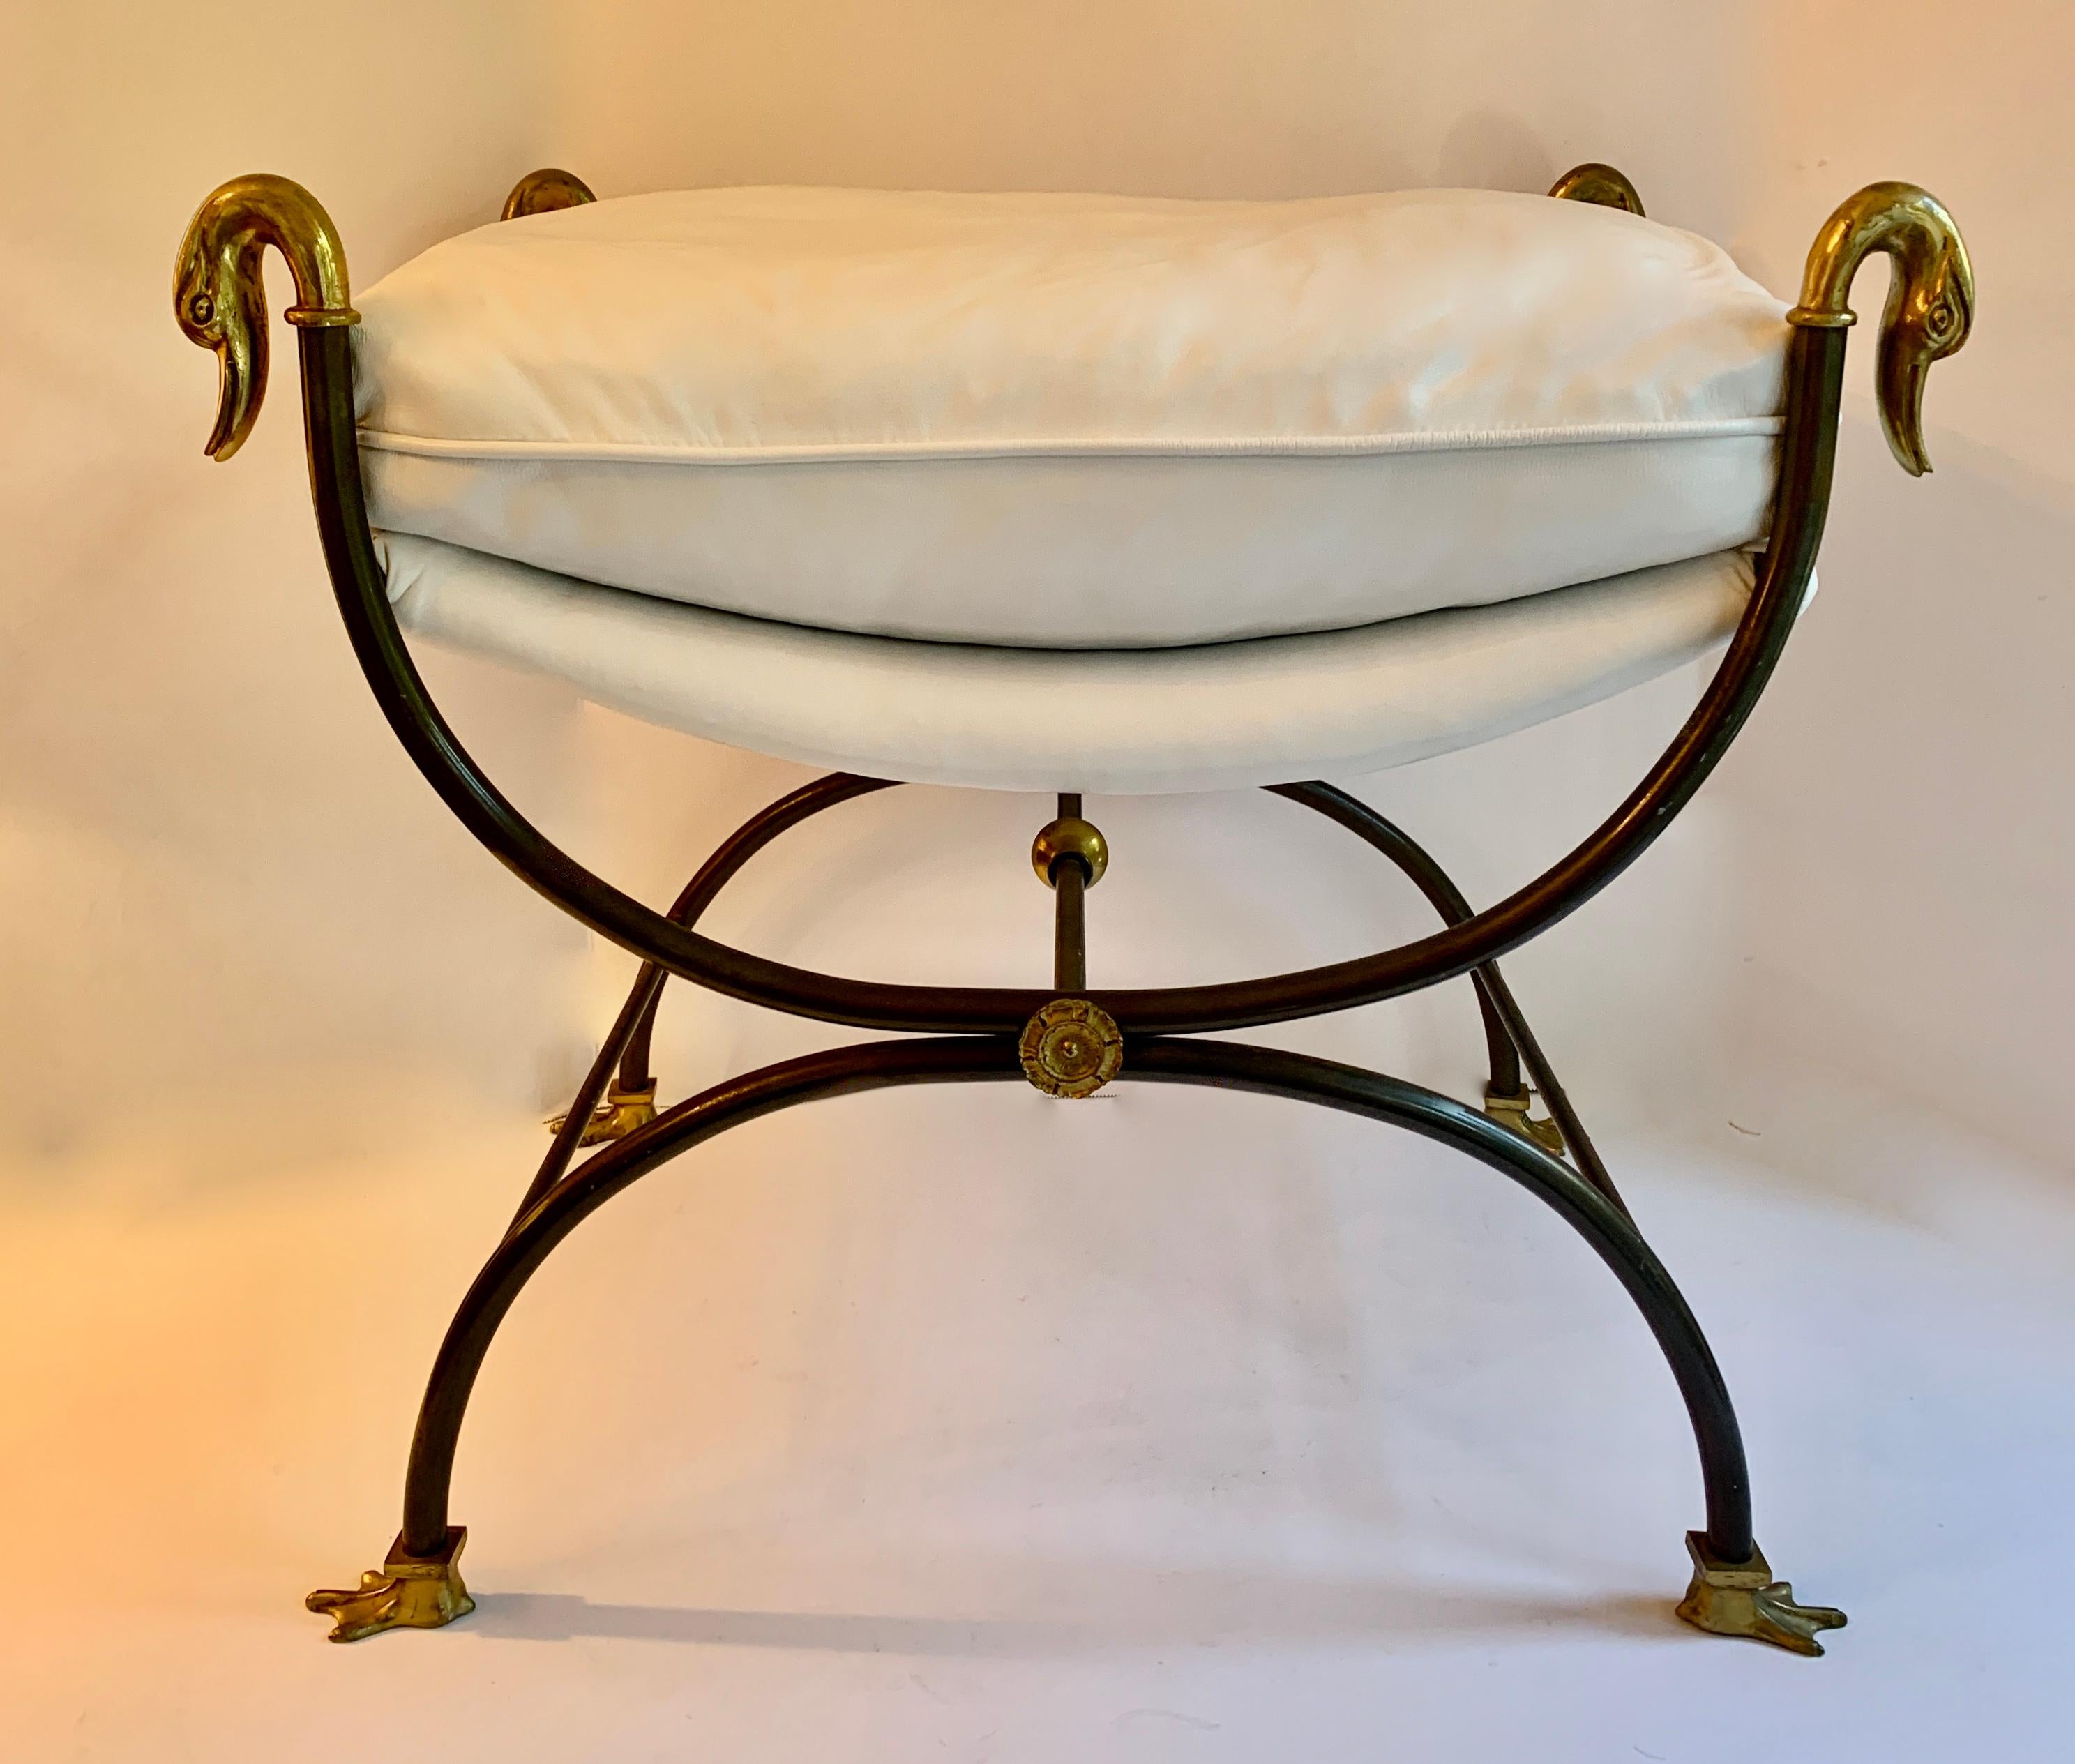 Maison Jansen metal vanity stool upholstered in Mongolian lamb. This wonderful piece is in iron, with geese, feet and medallion details in brass. A compliment too many rooms, the vanity or dressing room.